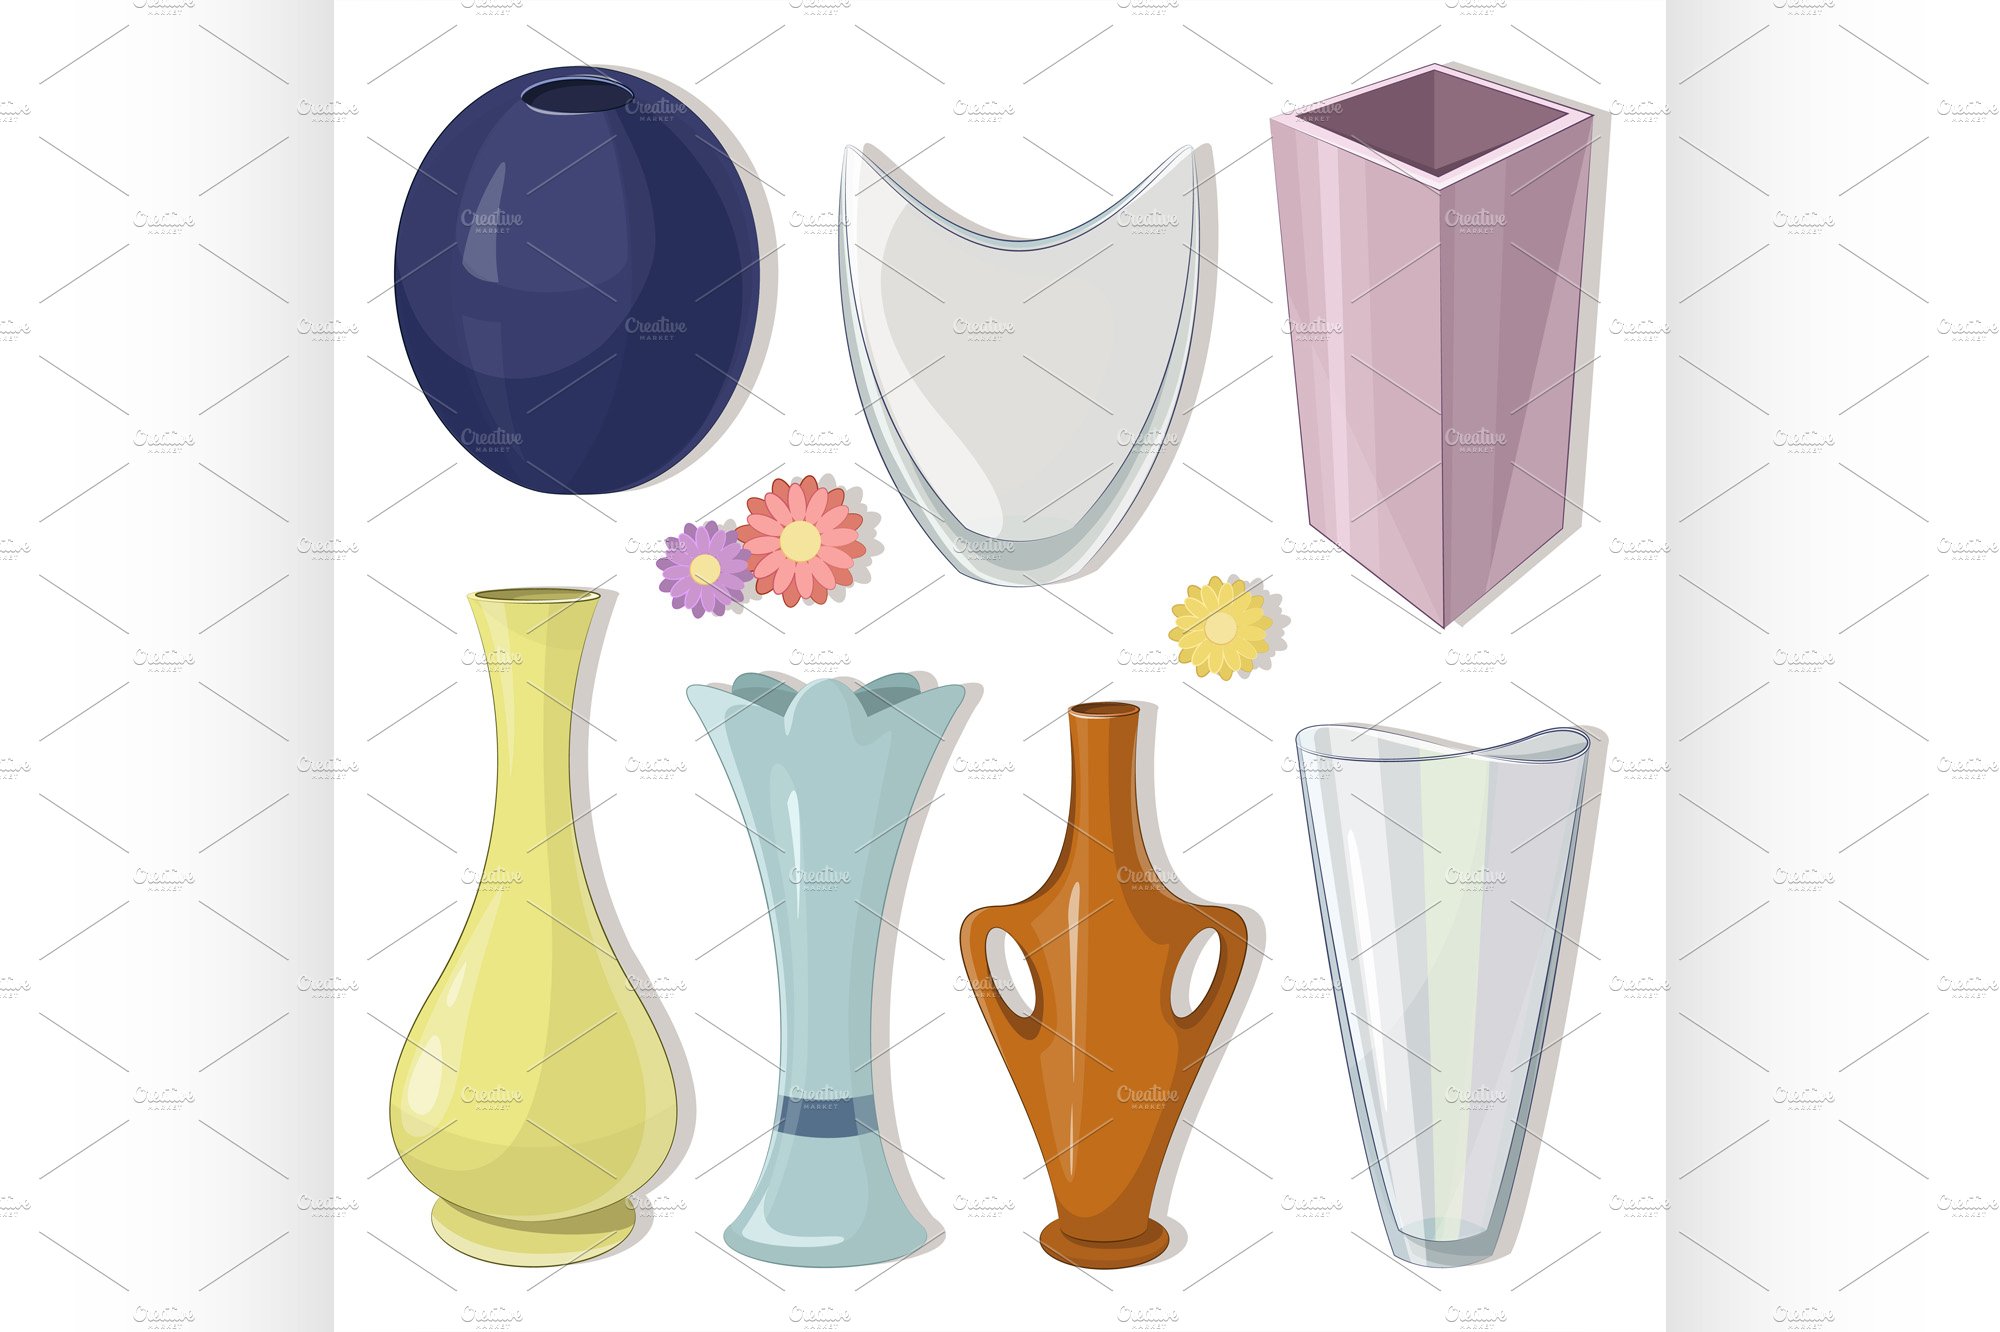 Vase set. Various forms of vases. Ho cover image.